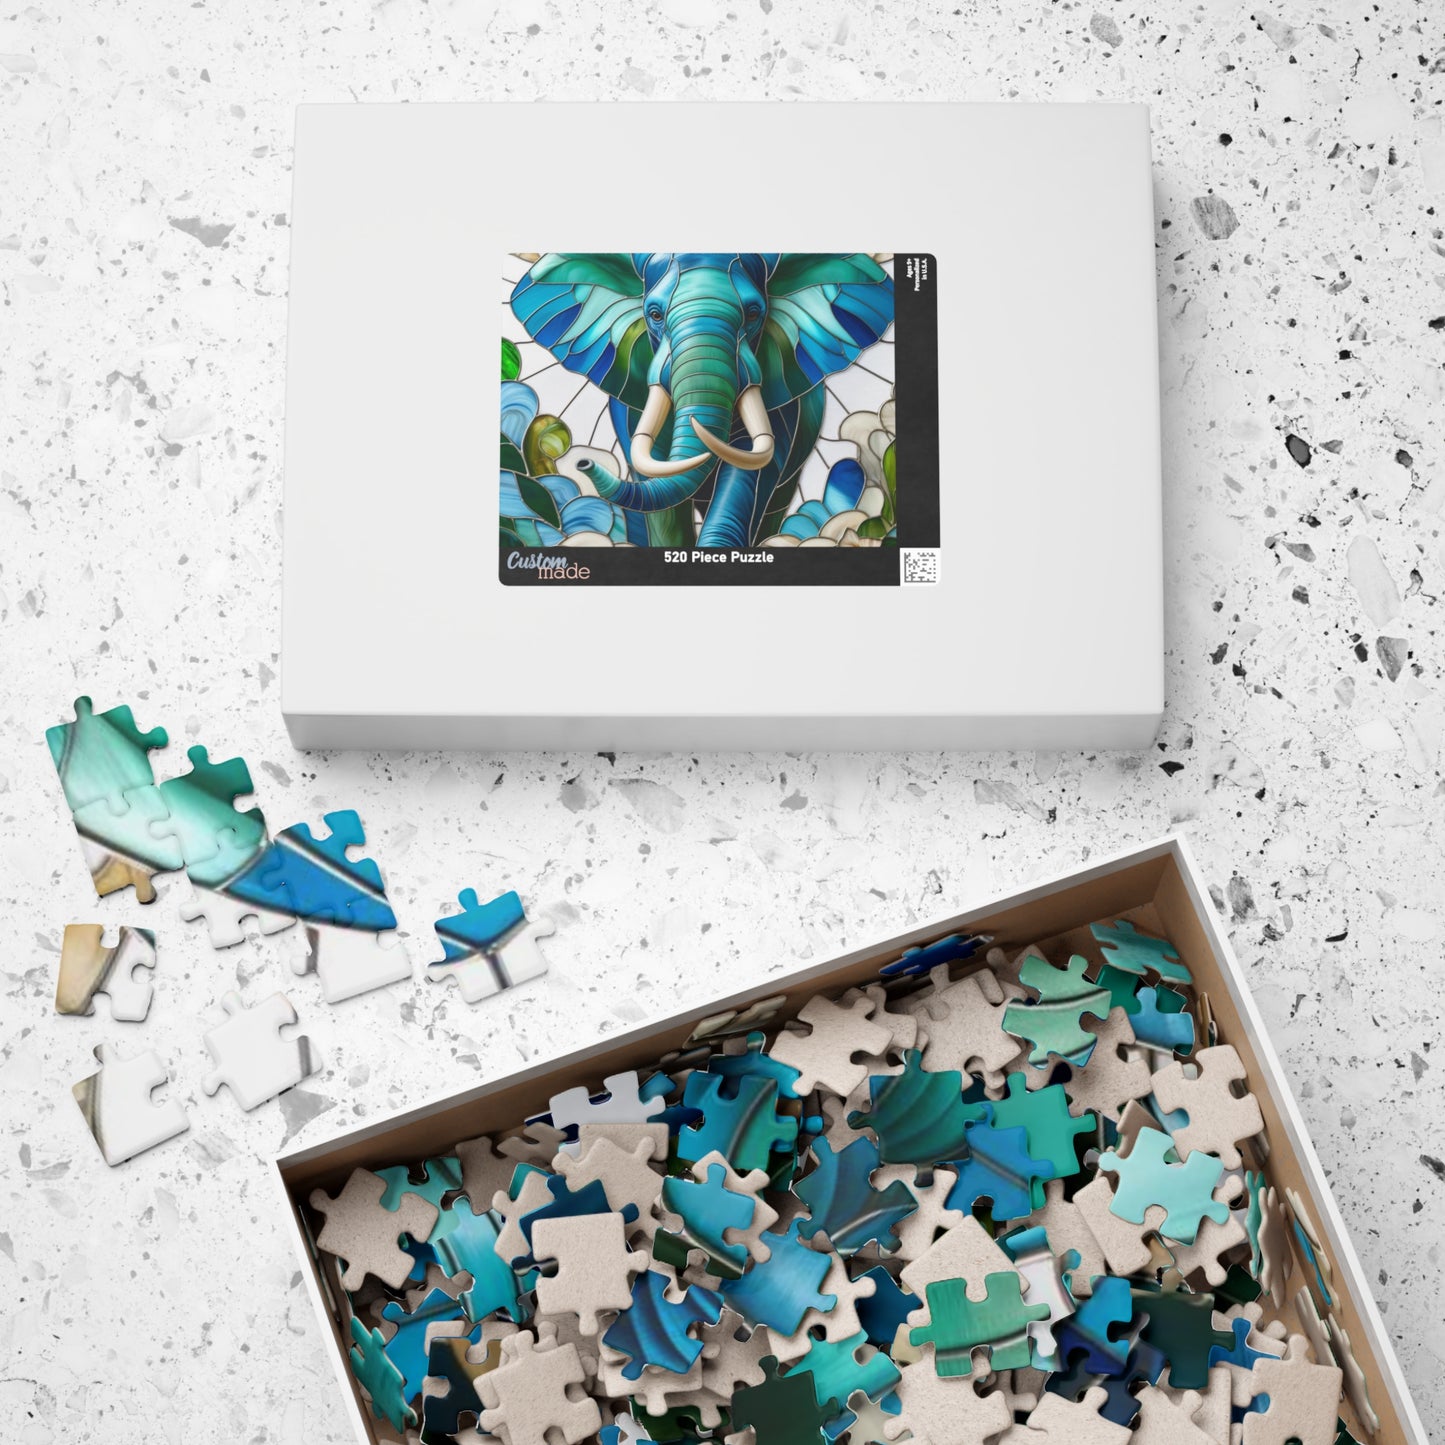 Stained Glass Elephant Jigsaw Puzzle